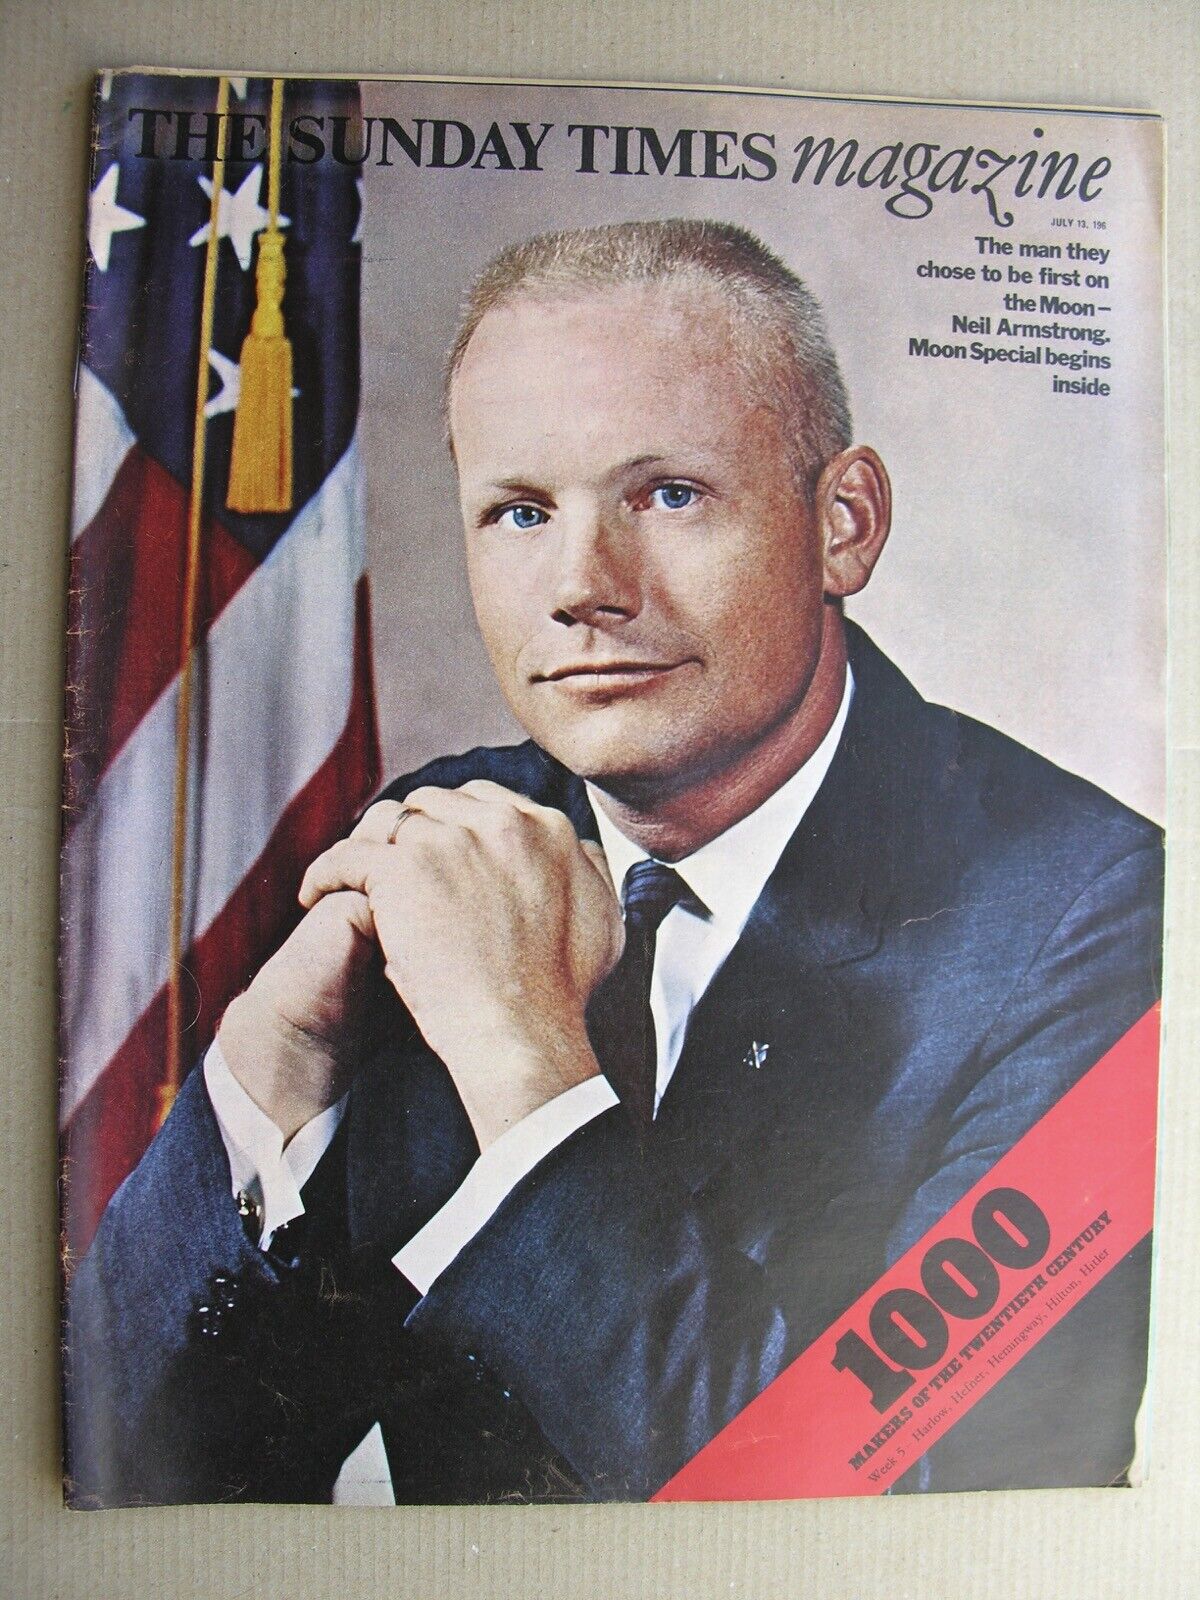 SUNDAY TIMES July 13 1969 Neil Armstrong Moon Apollo BIS Lunar Receiving Lab LRL